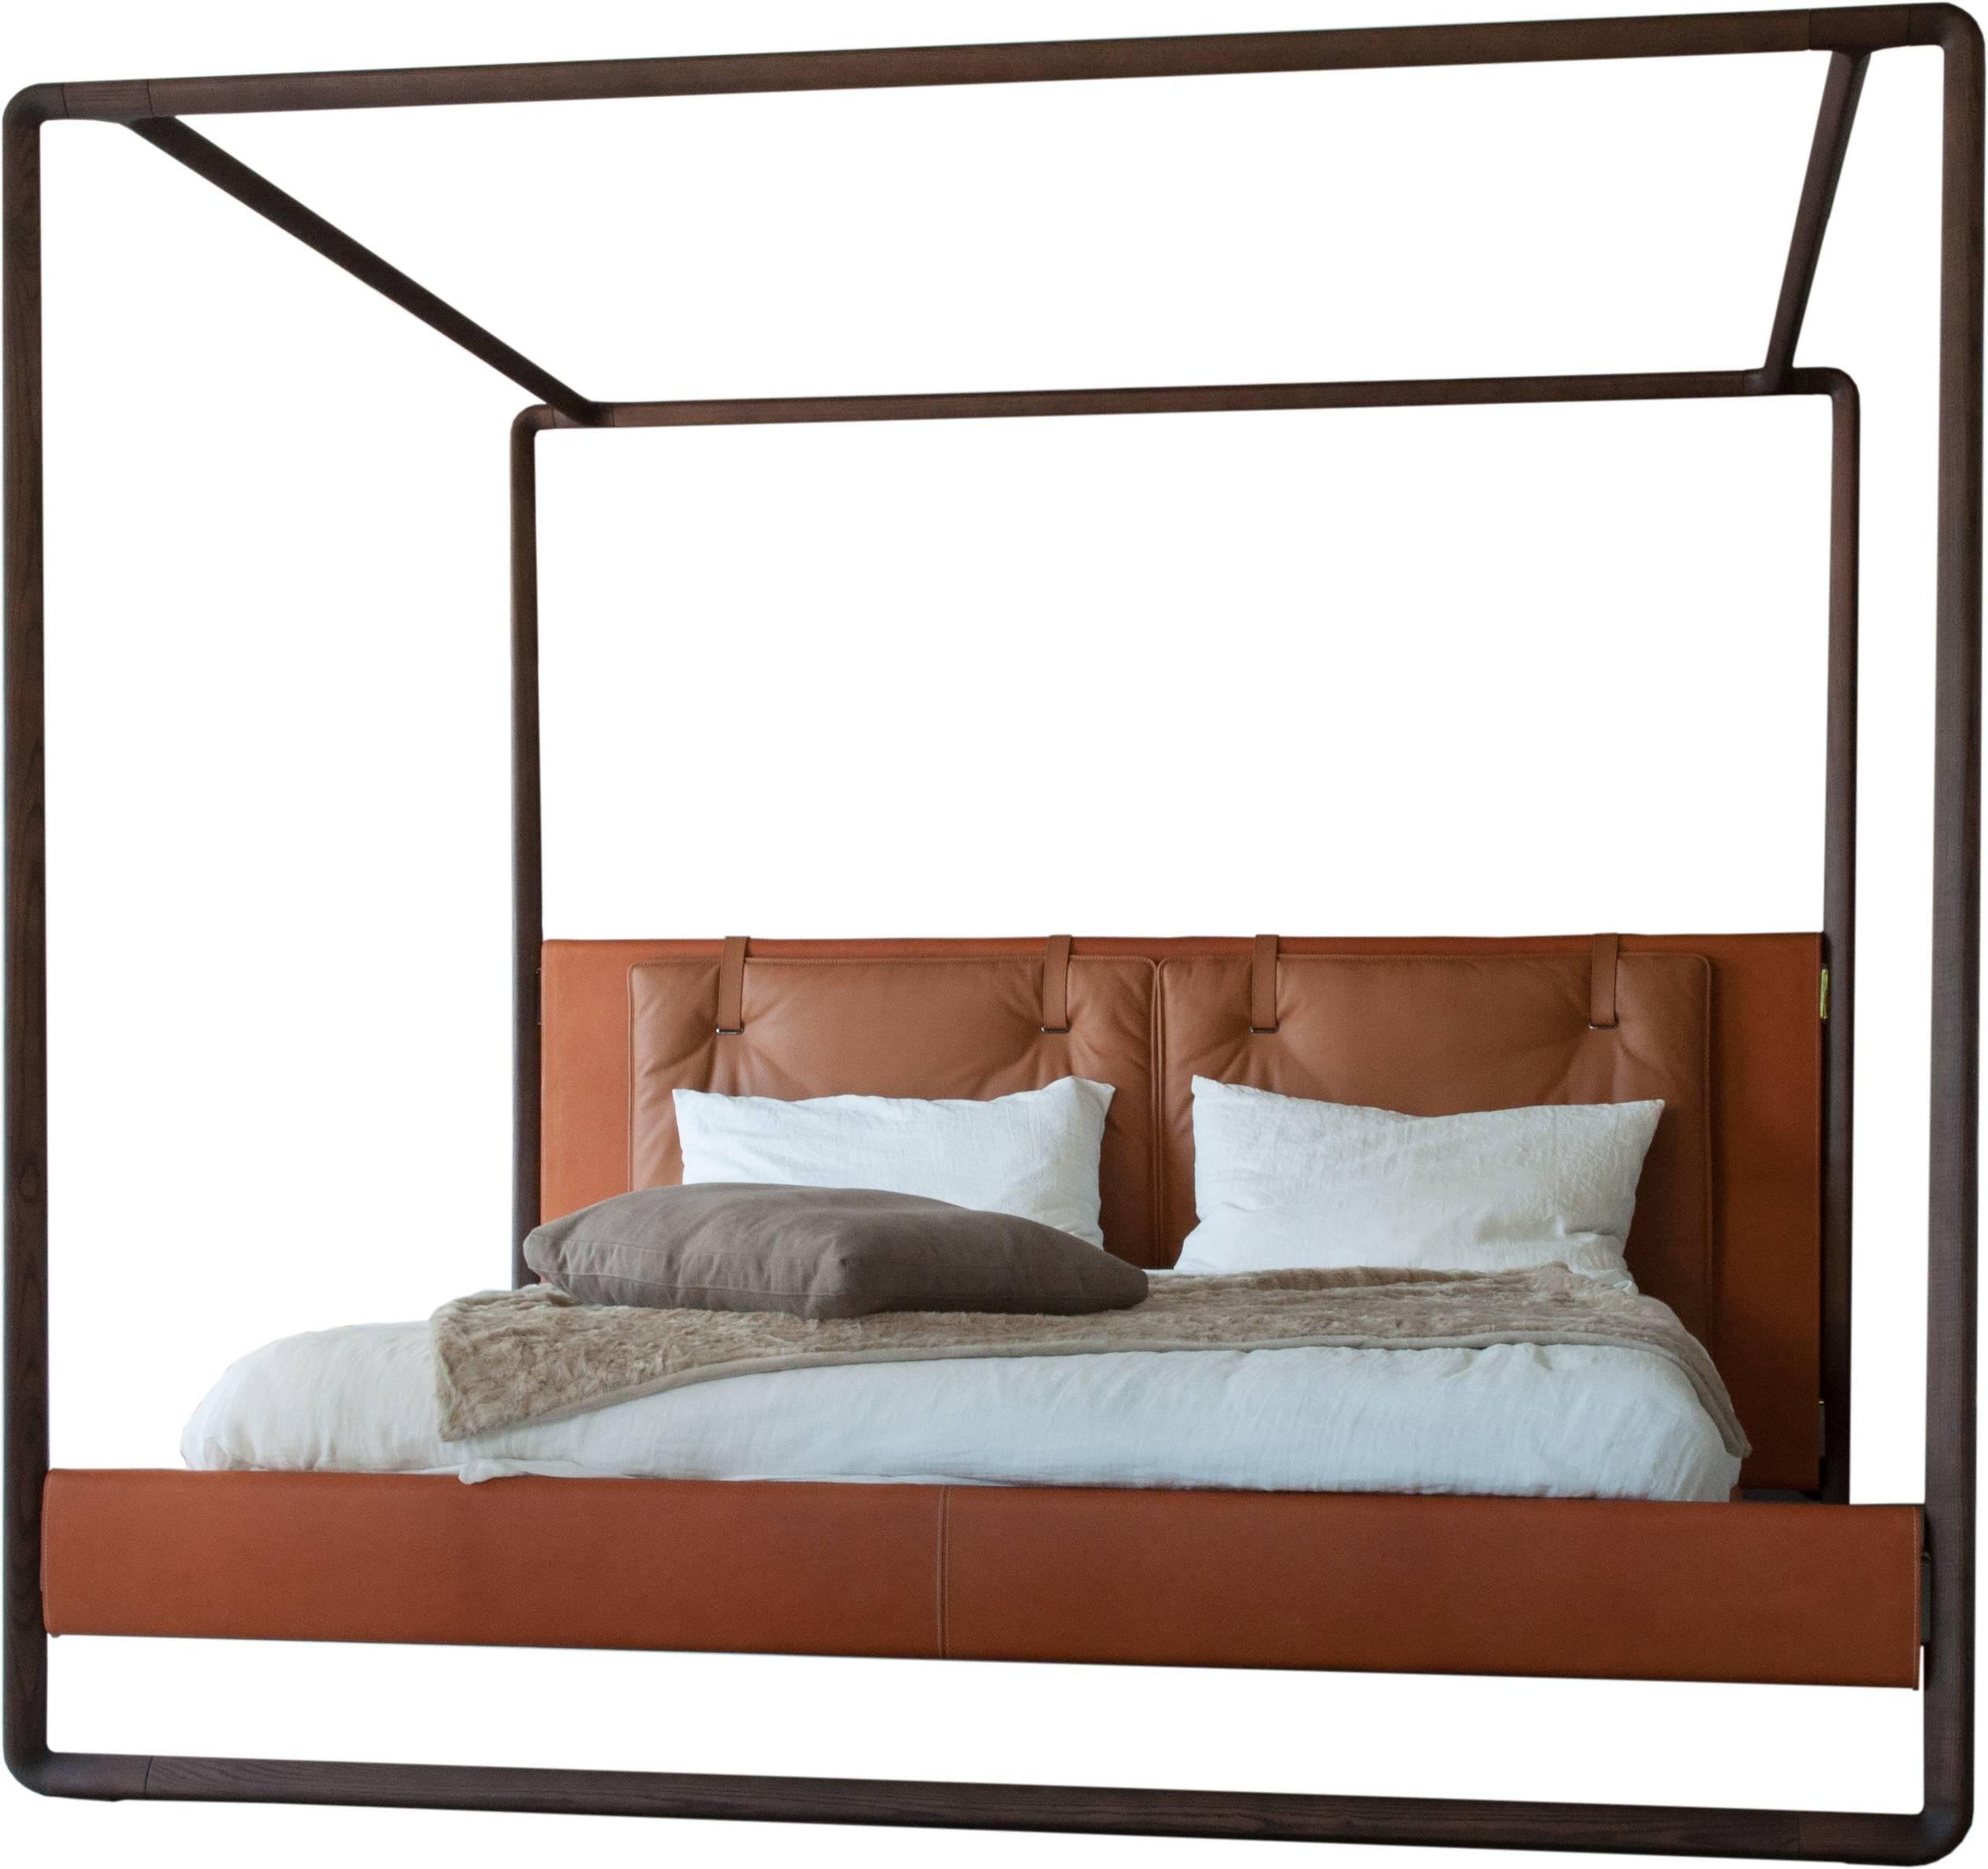 The triangular profile solid ash wood four poster structure gradually thins and lights towards the top. The nocturnal and elegant moka finish on the ash combines perfectly with the natural, vibrant tones of the leather taht cover the other elements.